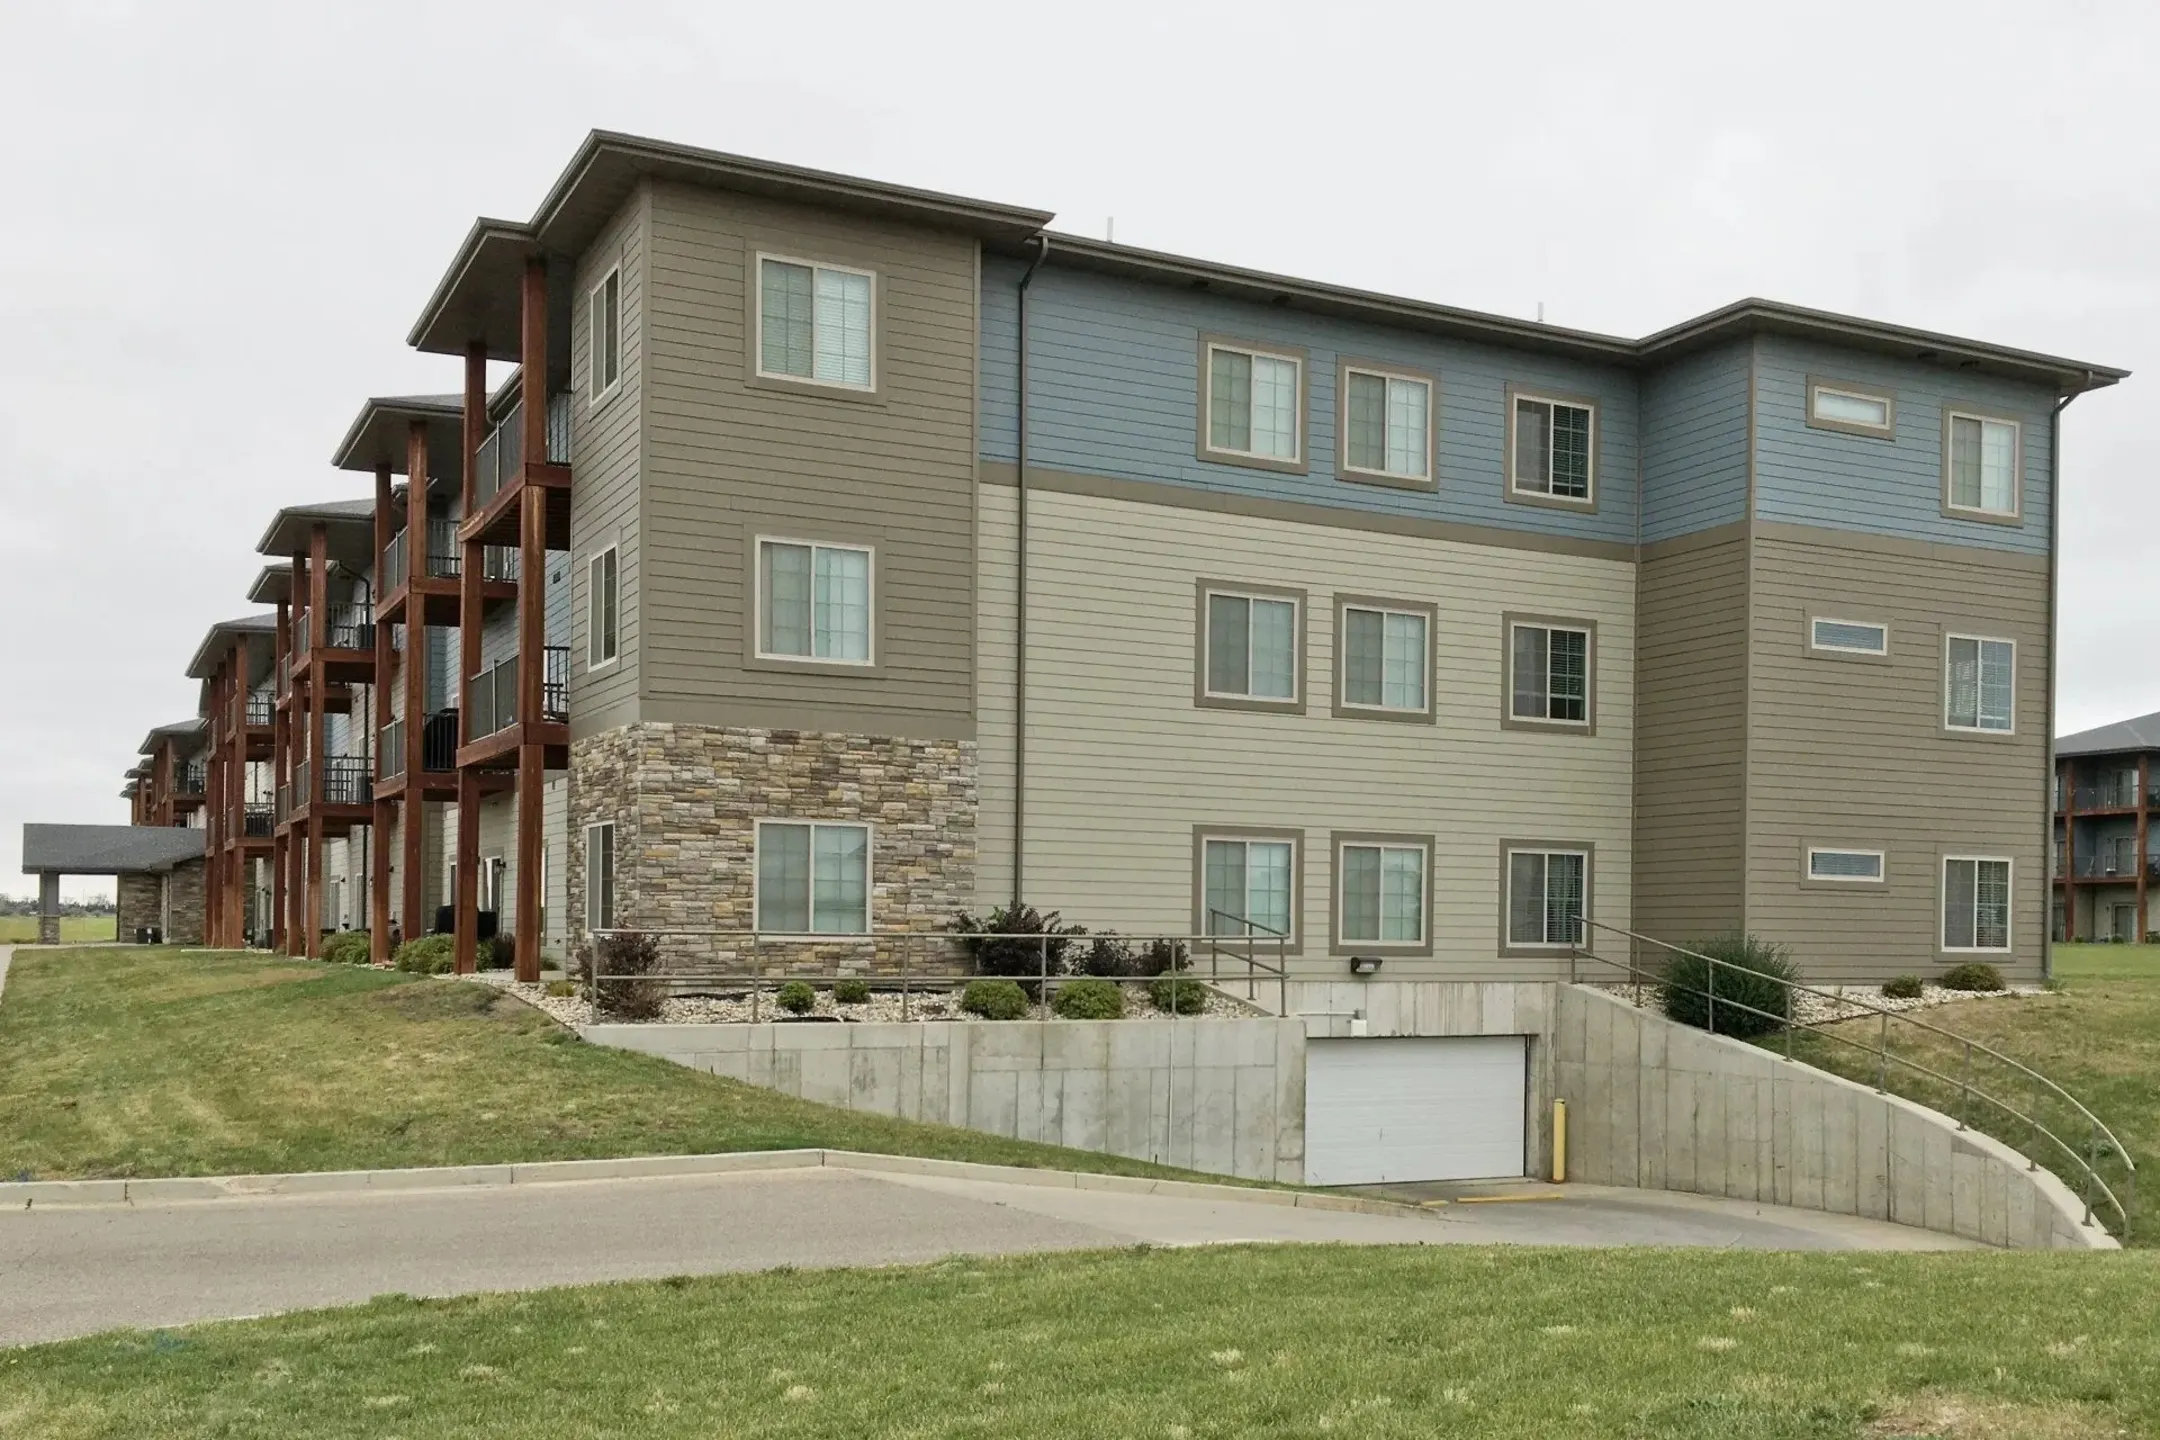 Building - North Highlands Luxury Apartments - Minot, ND